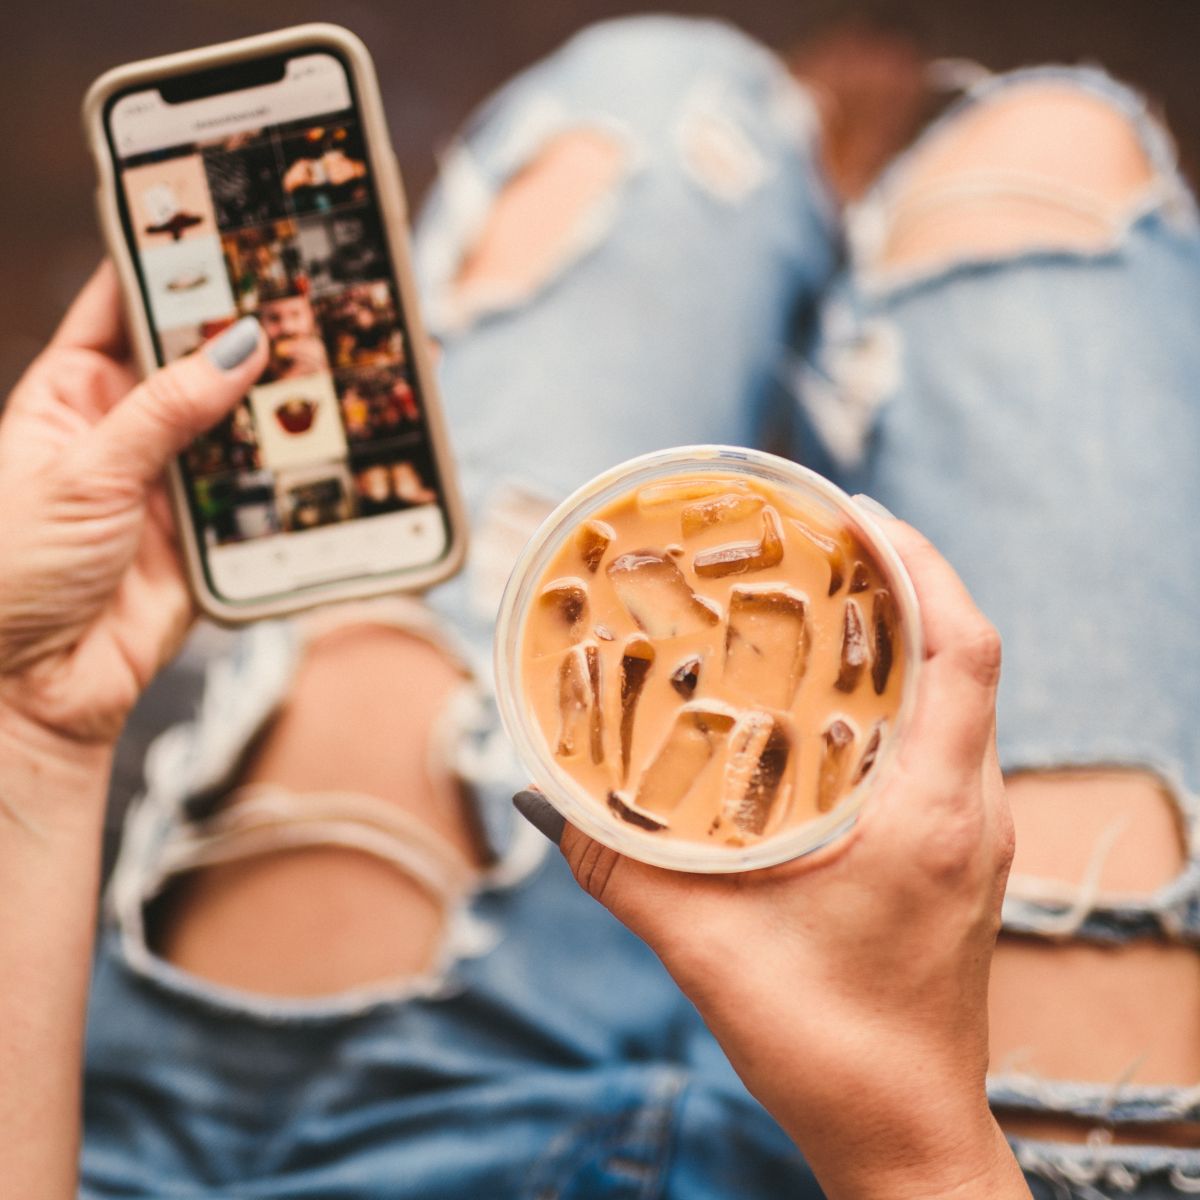 Steps to Creating a Business Video that Stands Out Closeup of person using a cell phone and holding iced coffee wearing torn jeans